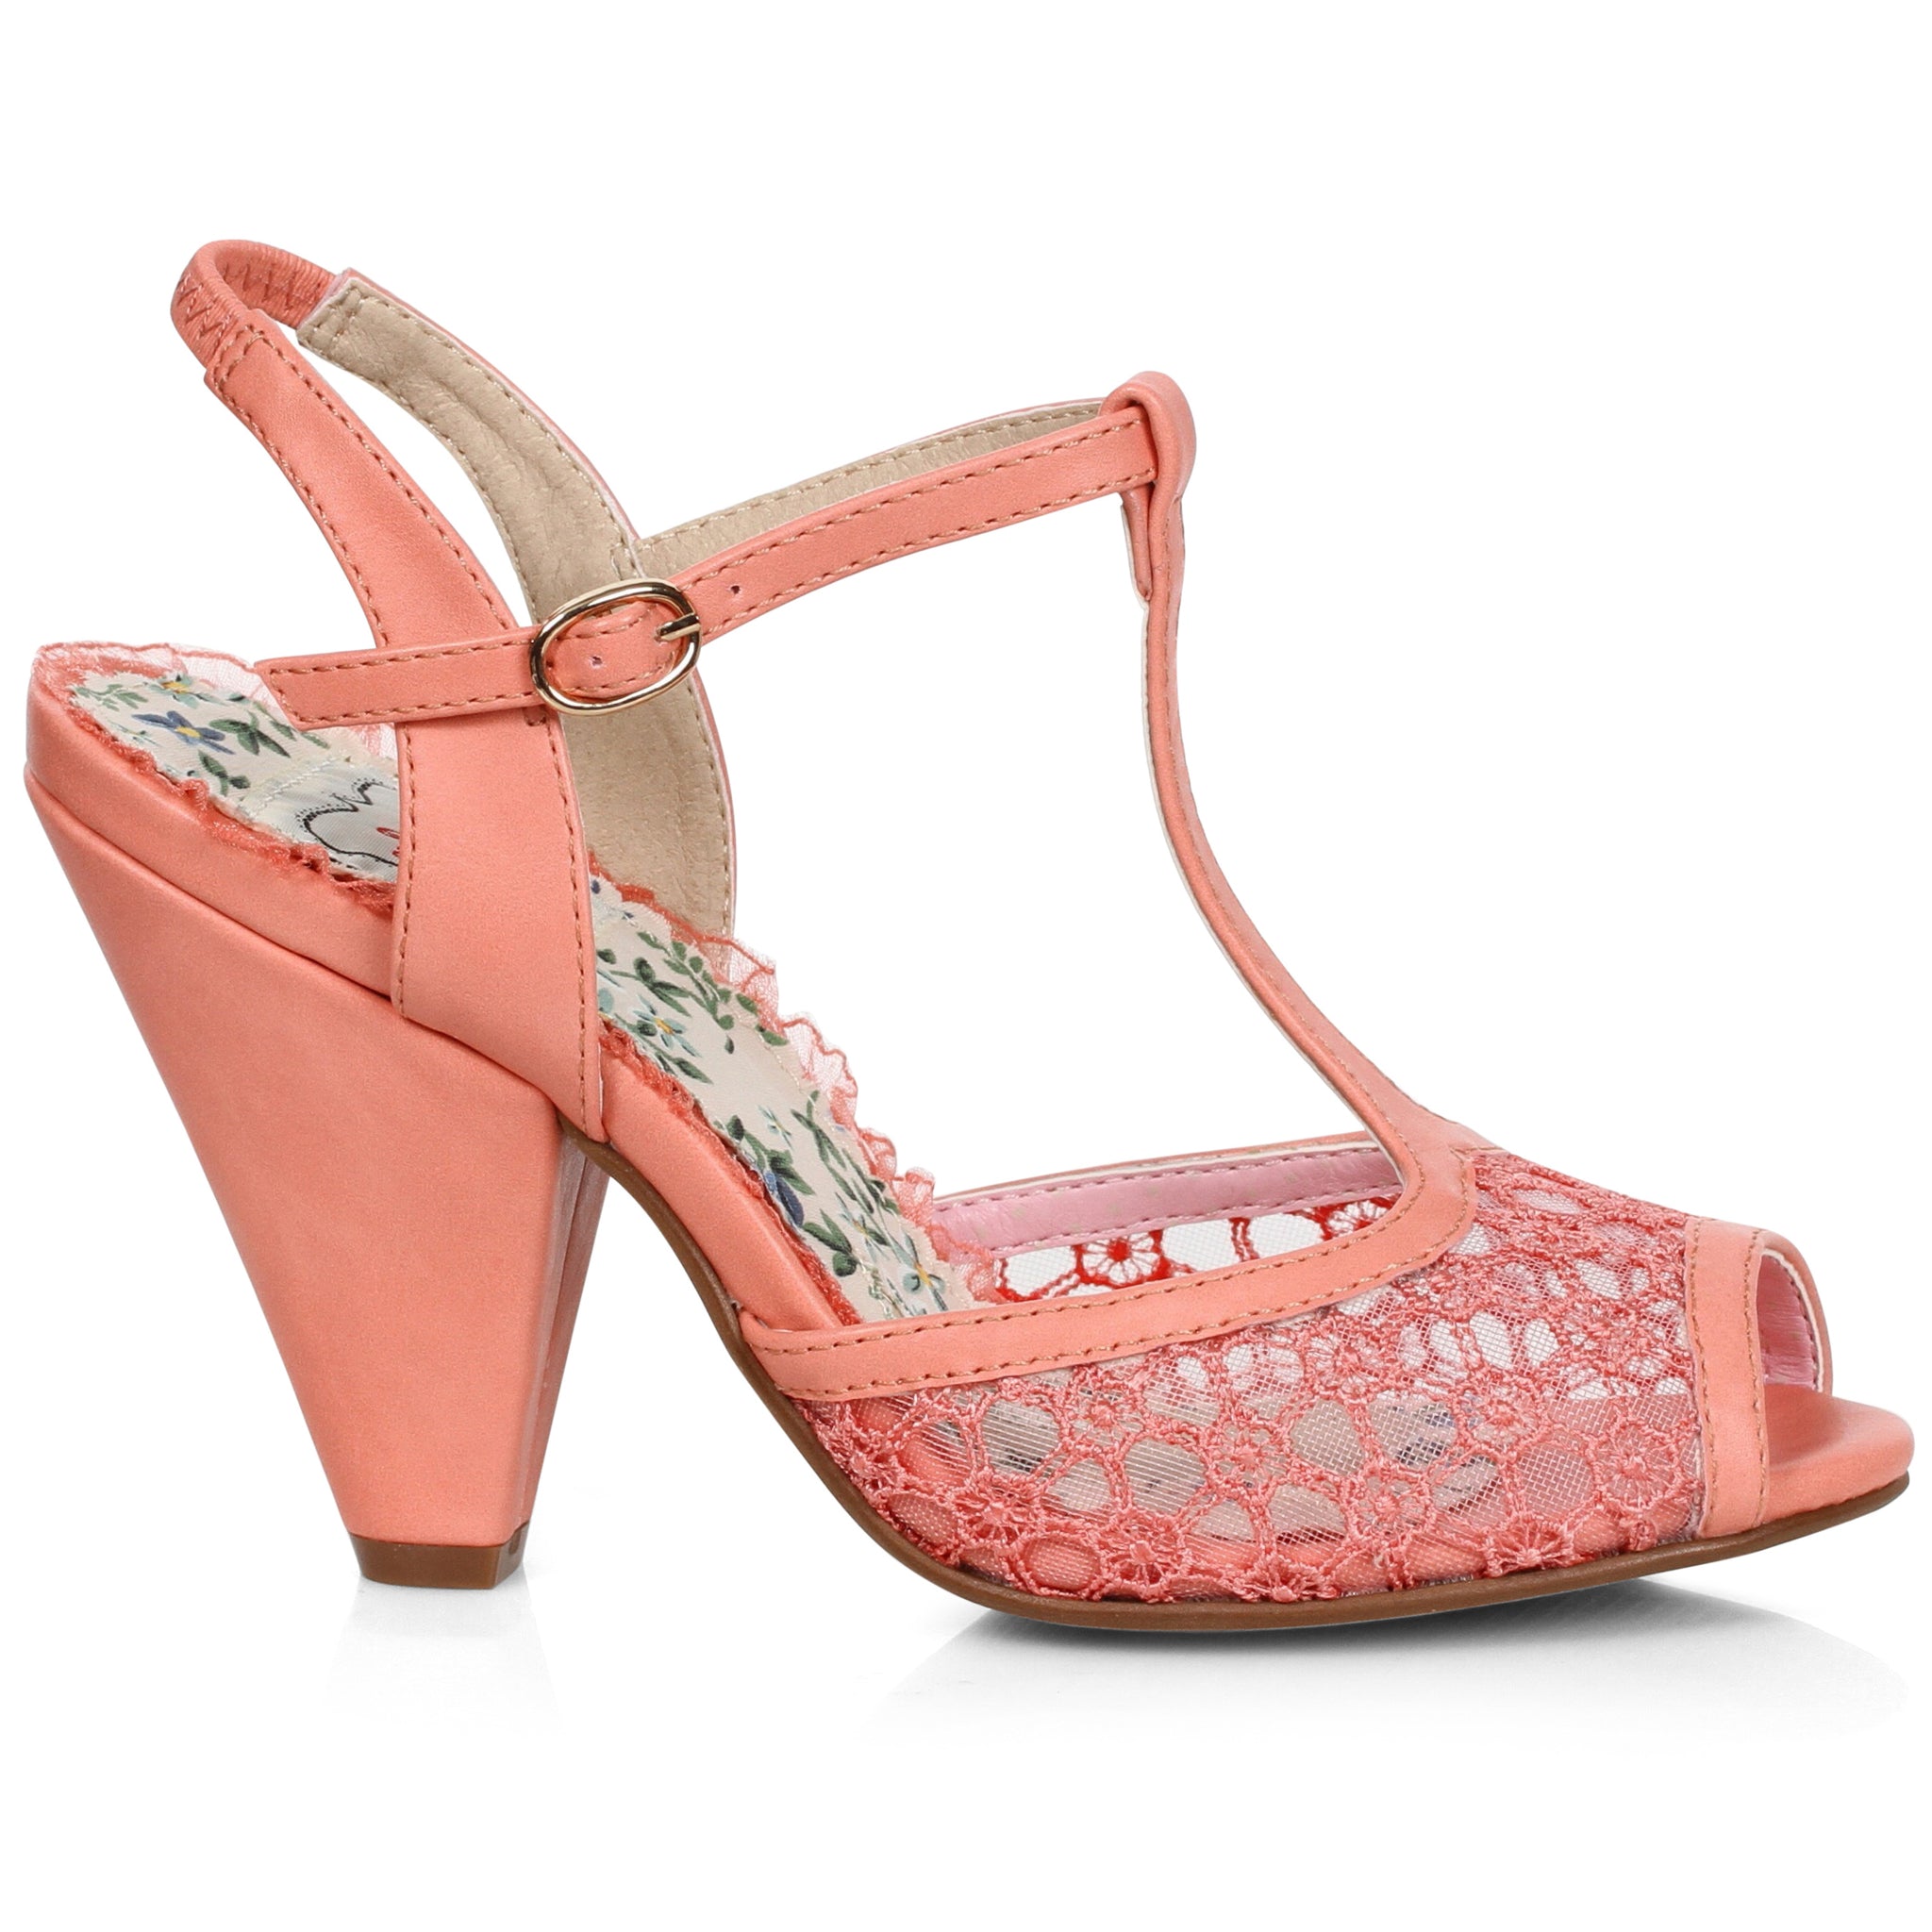 4 T-Strap Peep Toe Shoe With Lace